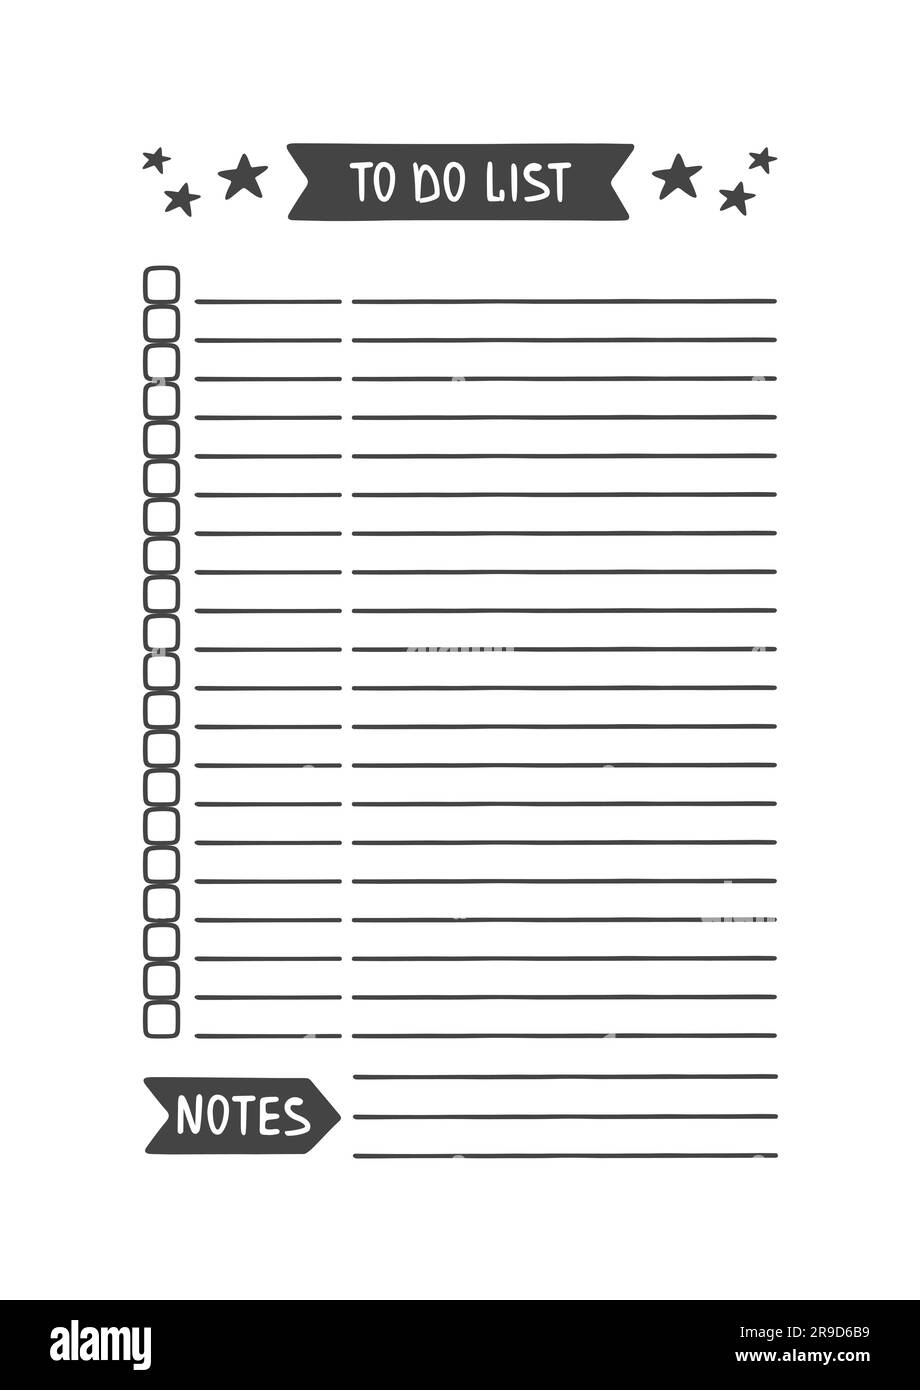 To Do List. Vector Template for Agenda, Planner and Other Stationery. Printable Organizer for Study, School or Work. Stock Vector